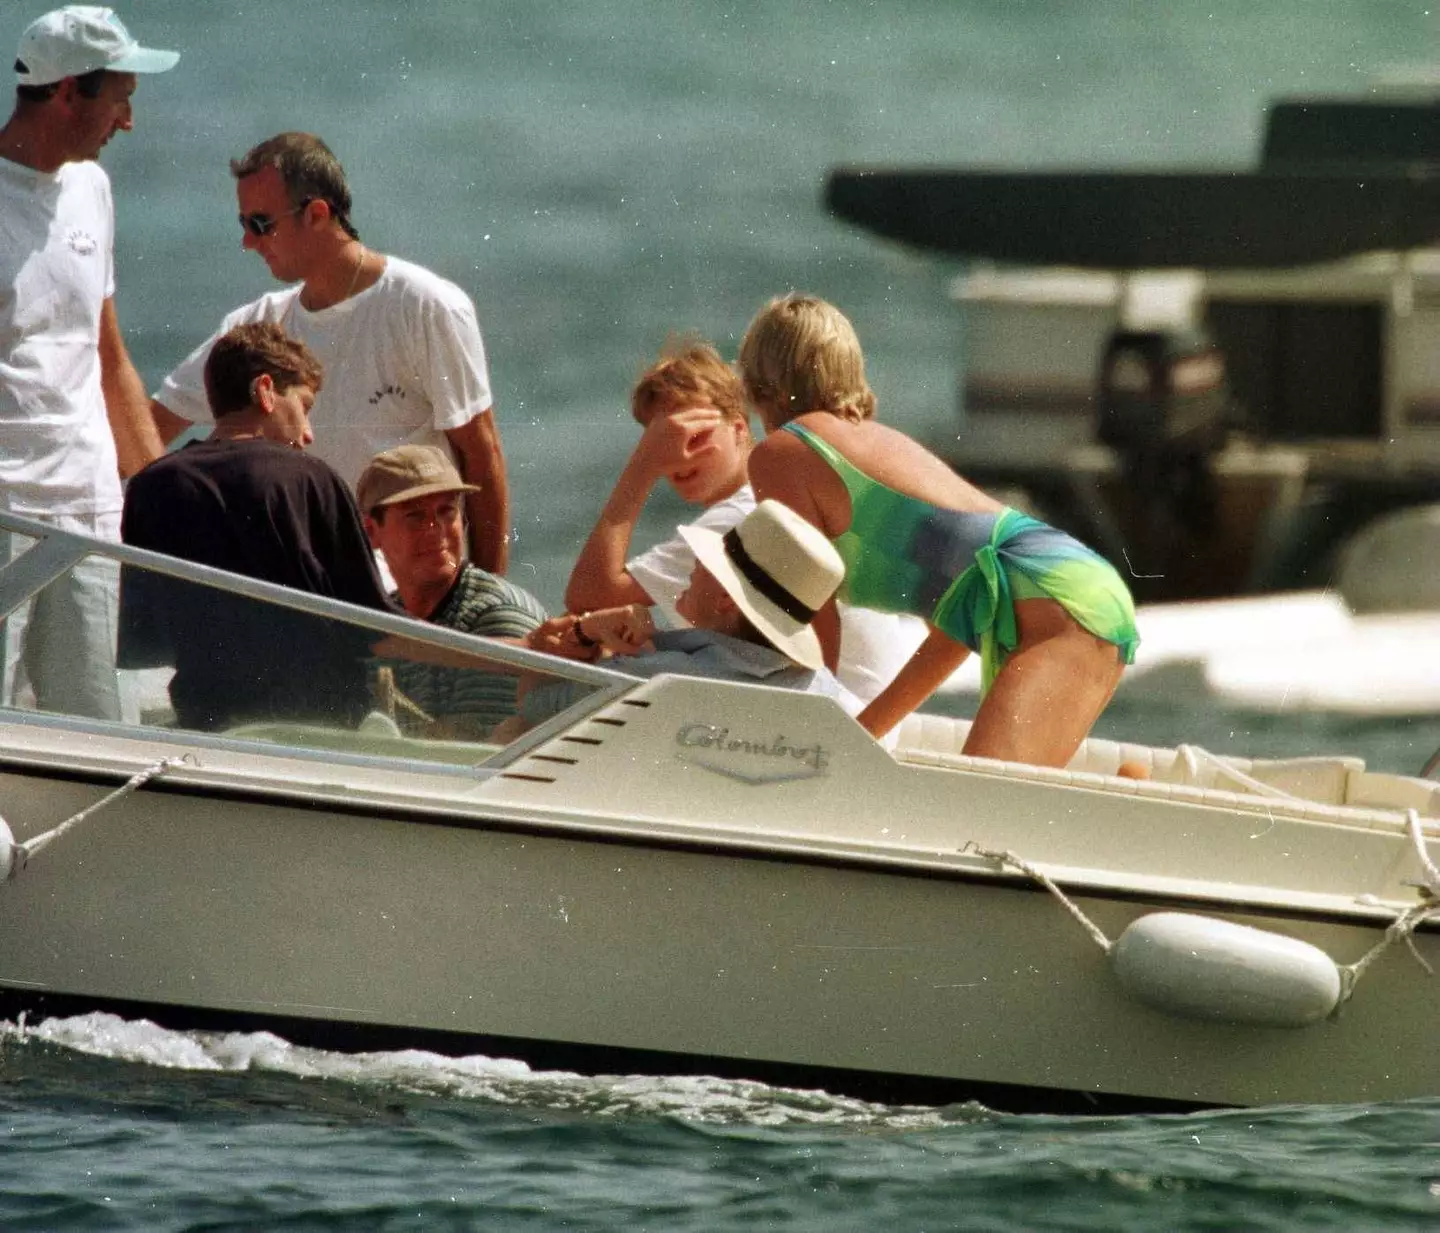 Diana holidayed in Saint Tropez with the Al-Fayed family and her sons William and Harry.